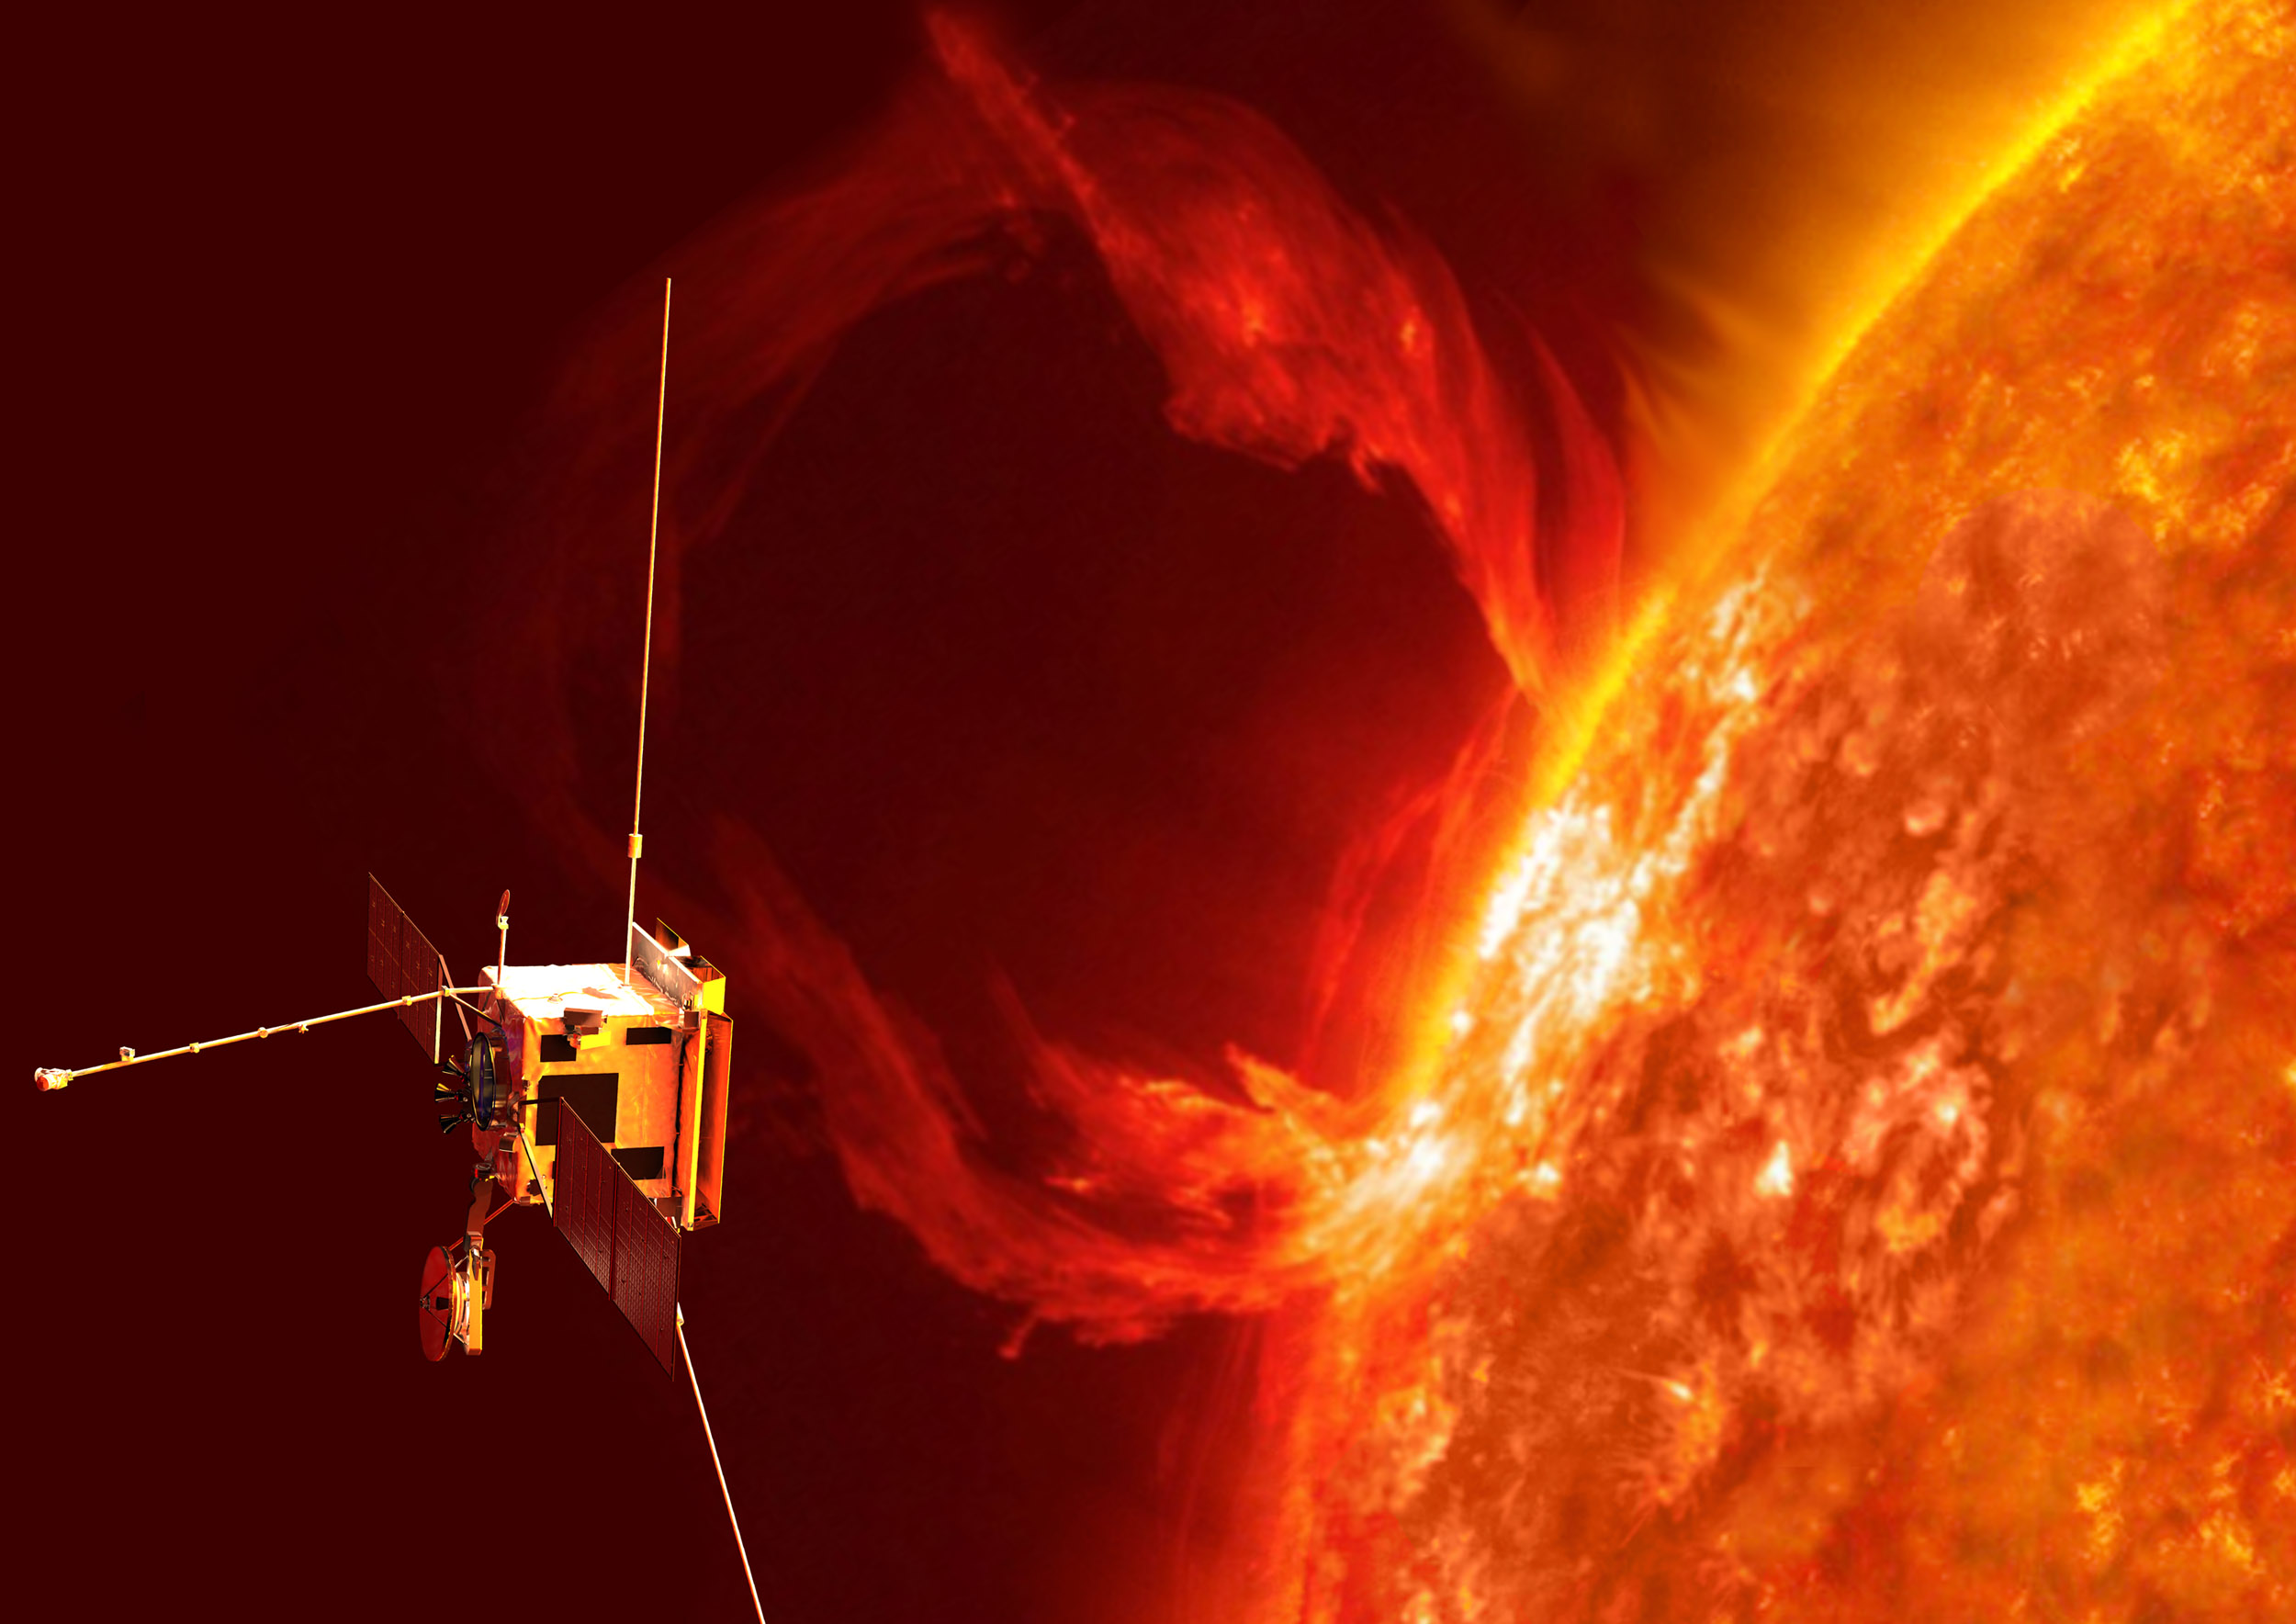 An artist's impression of the Solar Orbiter exploring the sun's realm. Image credit: ESA/AOES